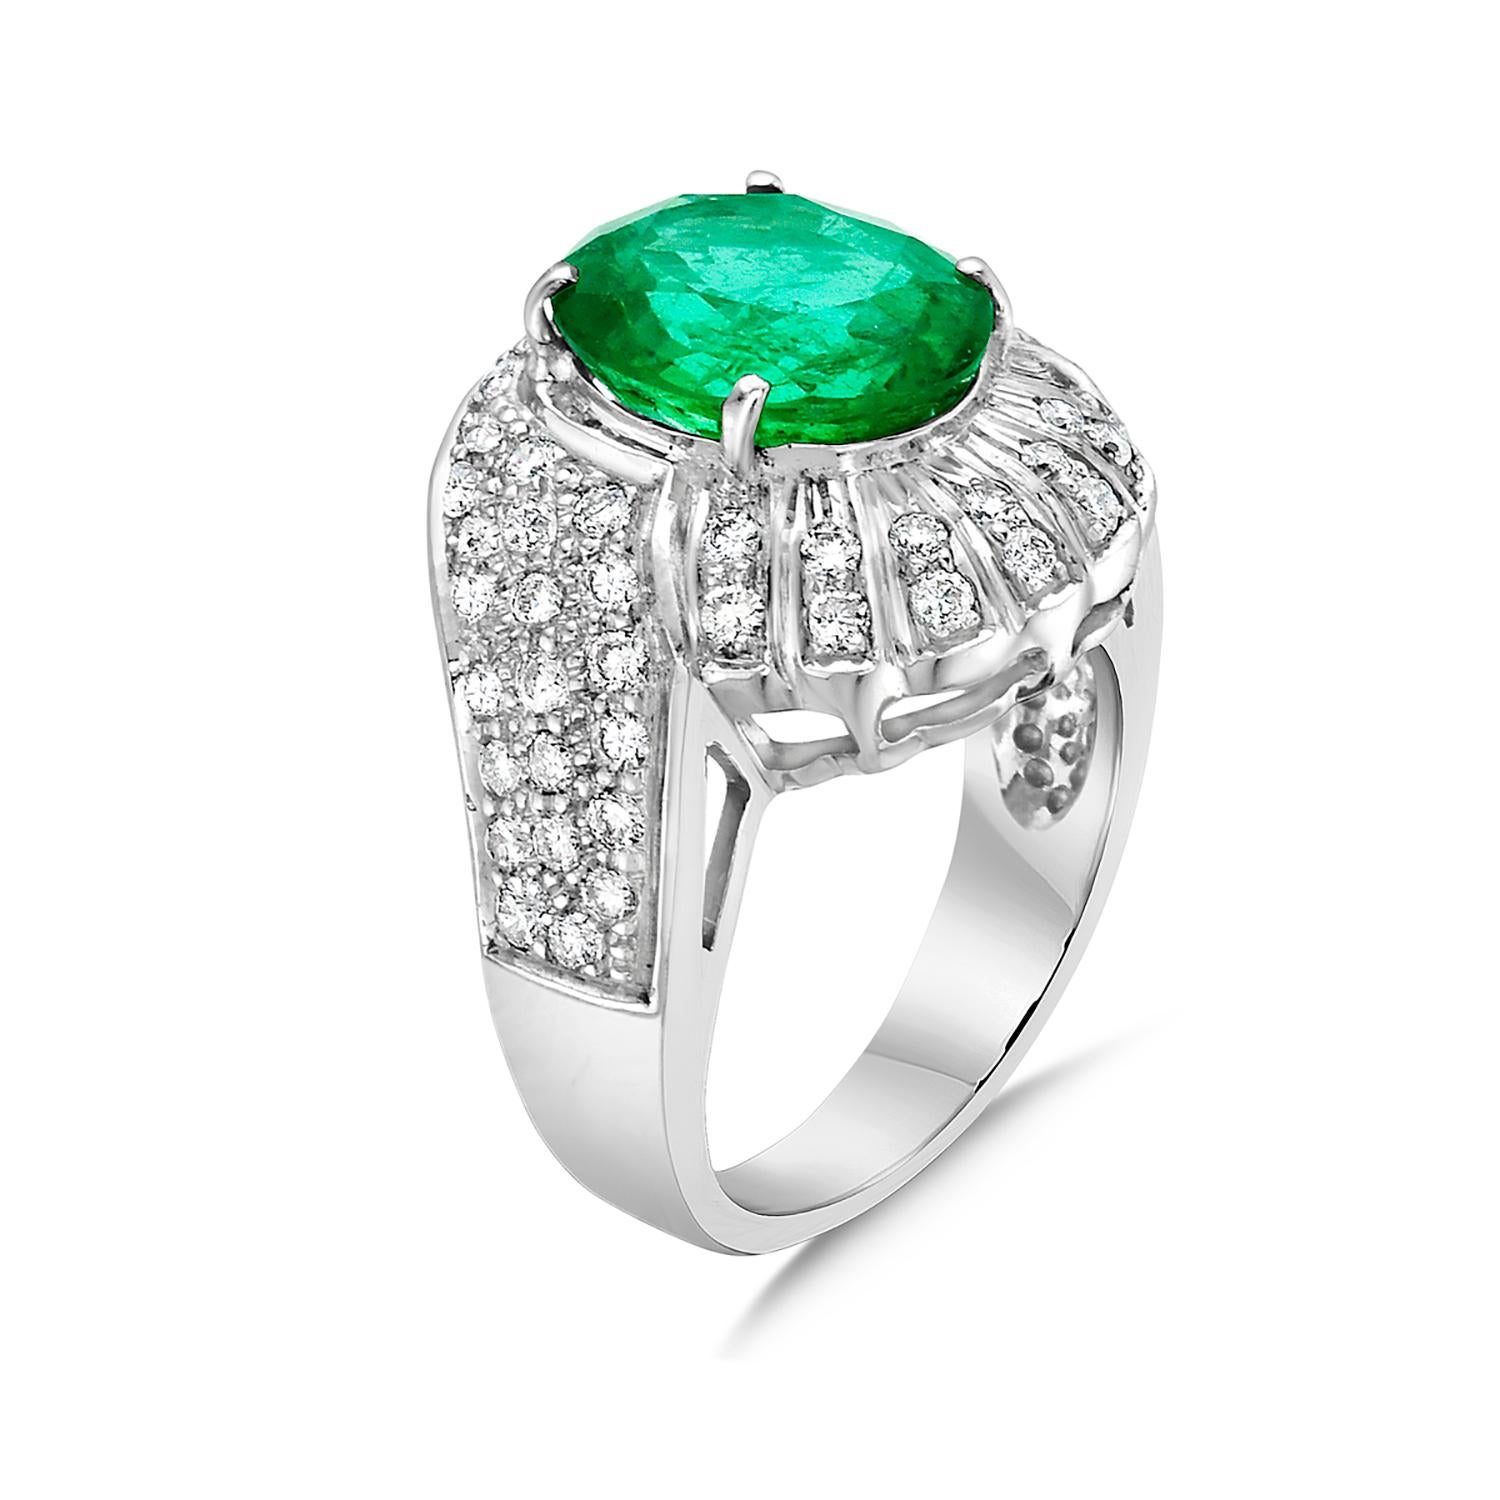 Contemporary Oval Shaped Zambian Emerald Cocktail Ring with Pave VS Diamond In 18k White Gold For Sale